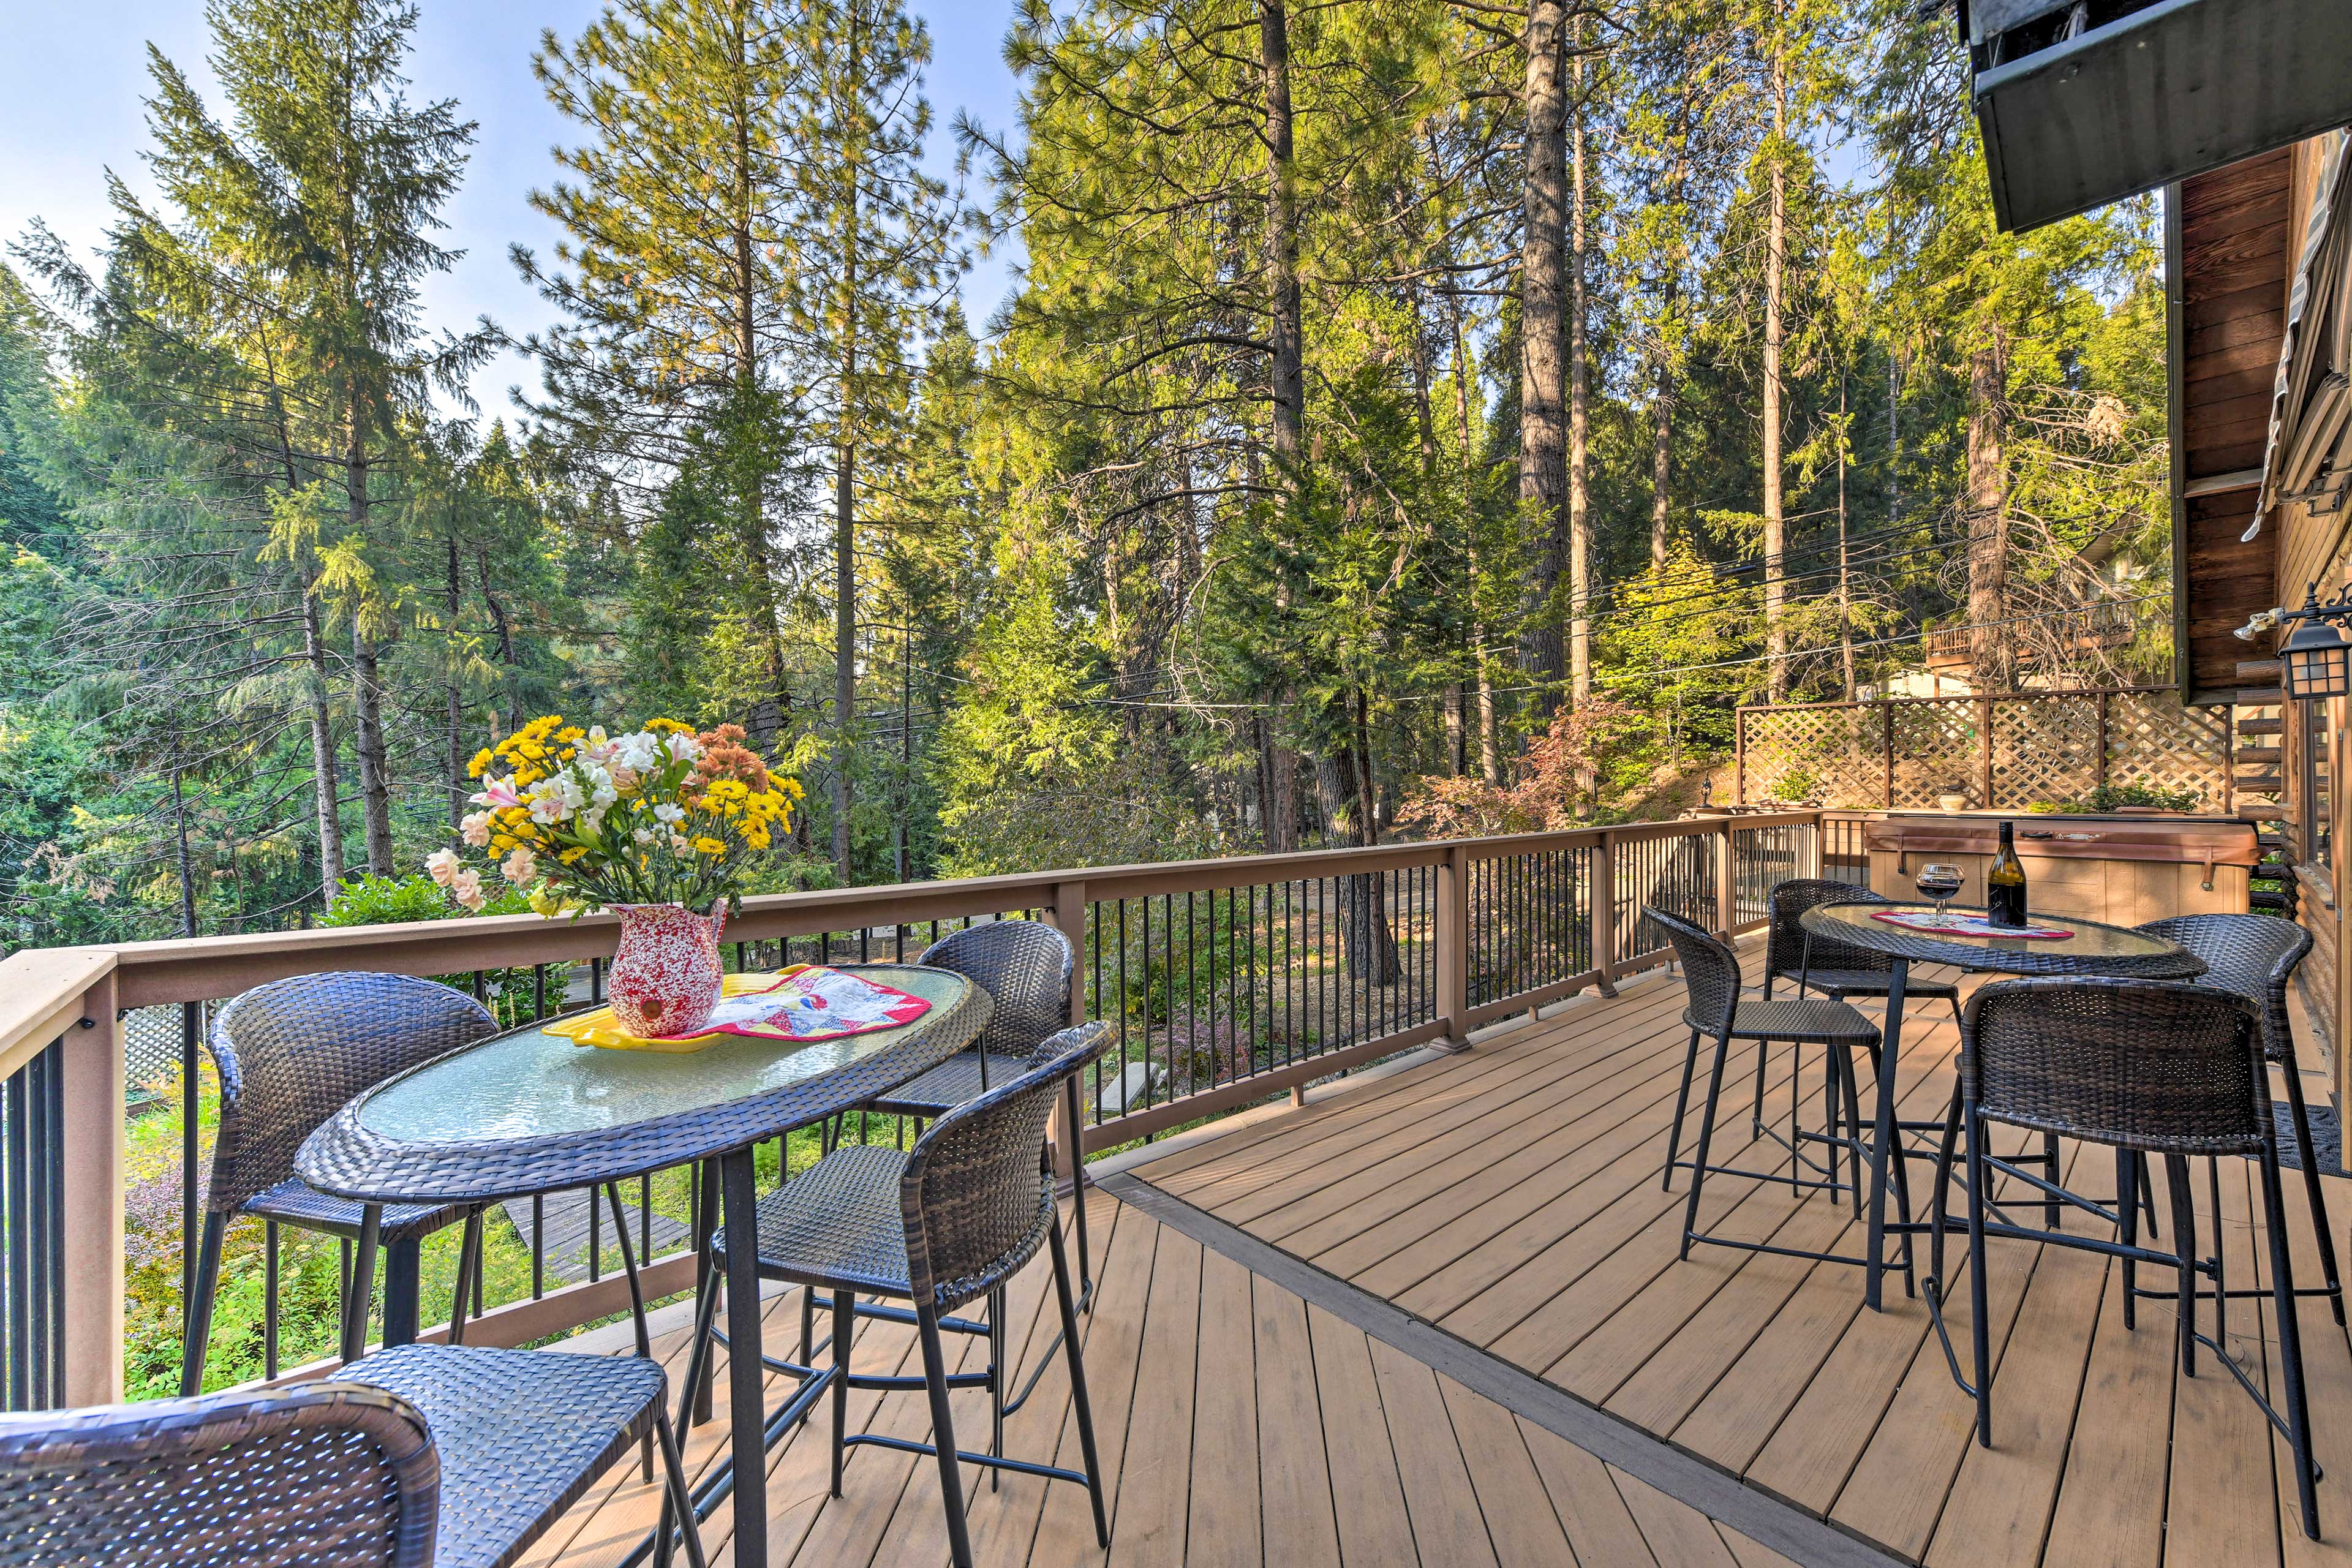 Spend your evenings on the deck of this vacation rental watching the sun set.